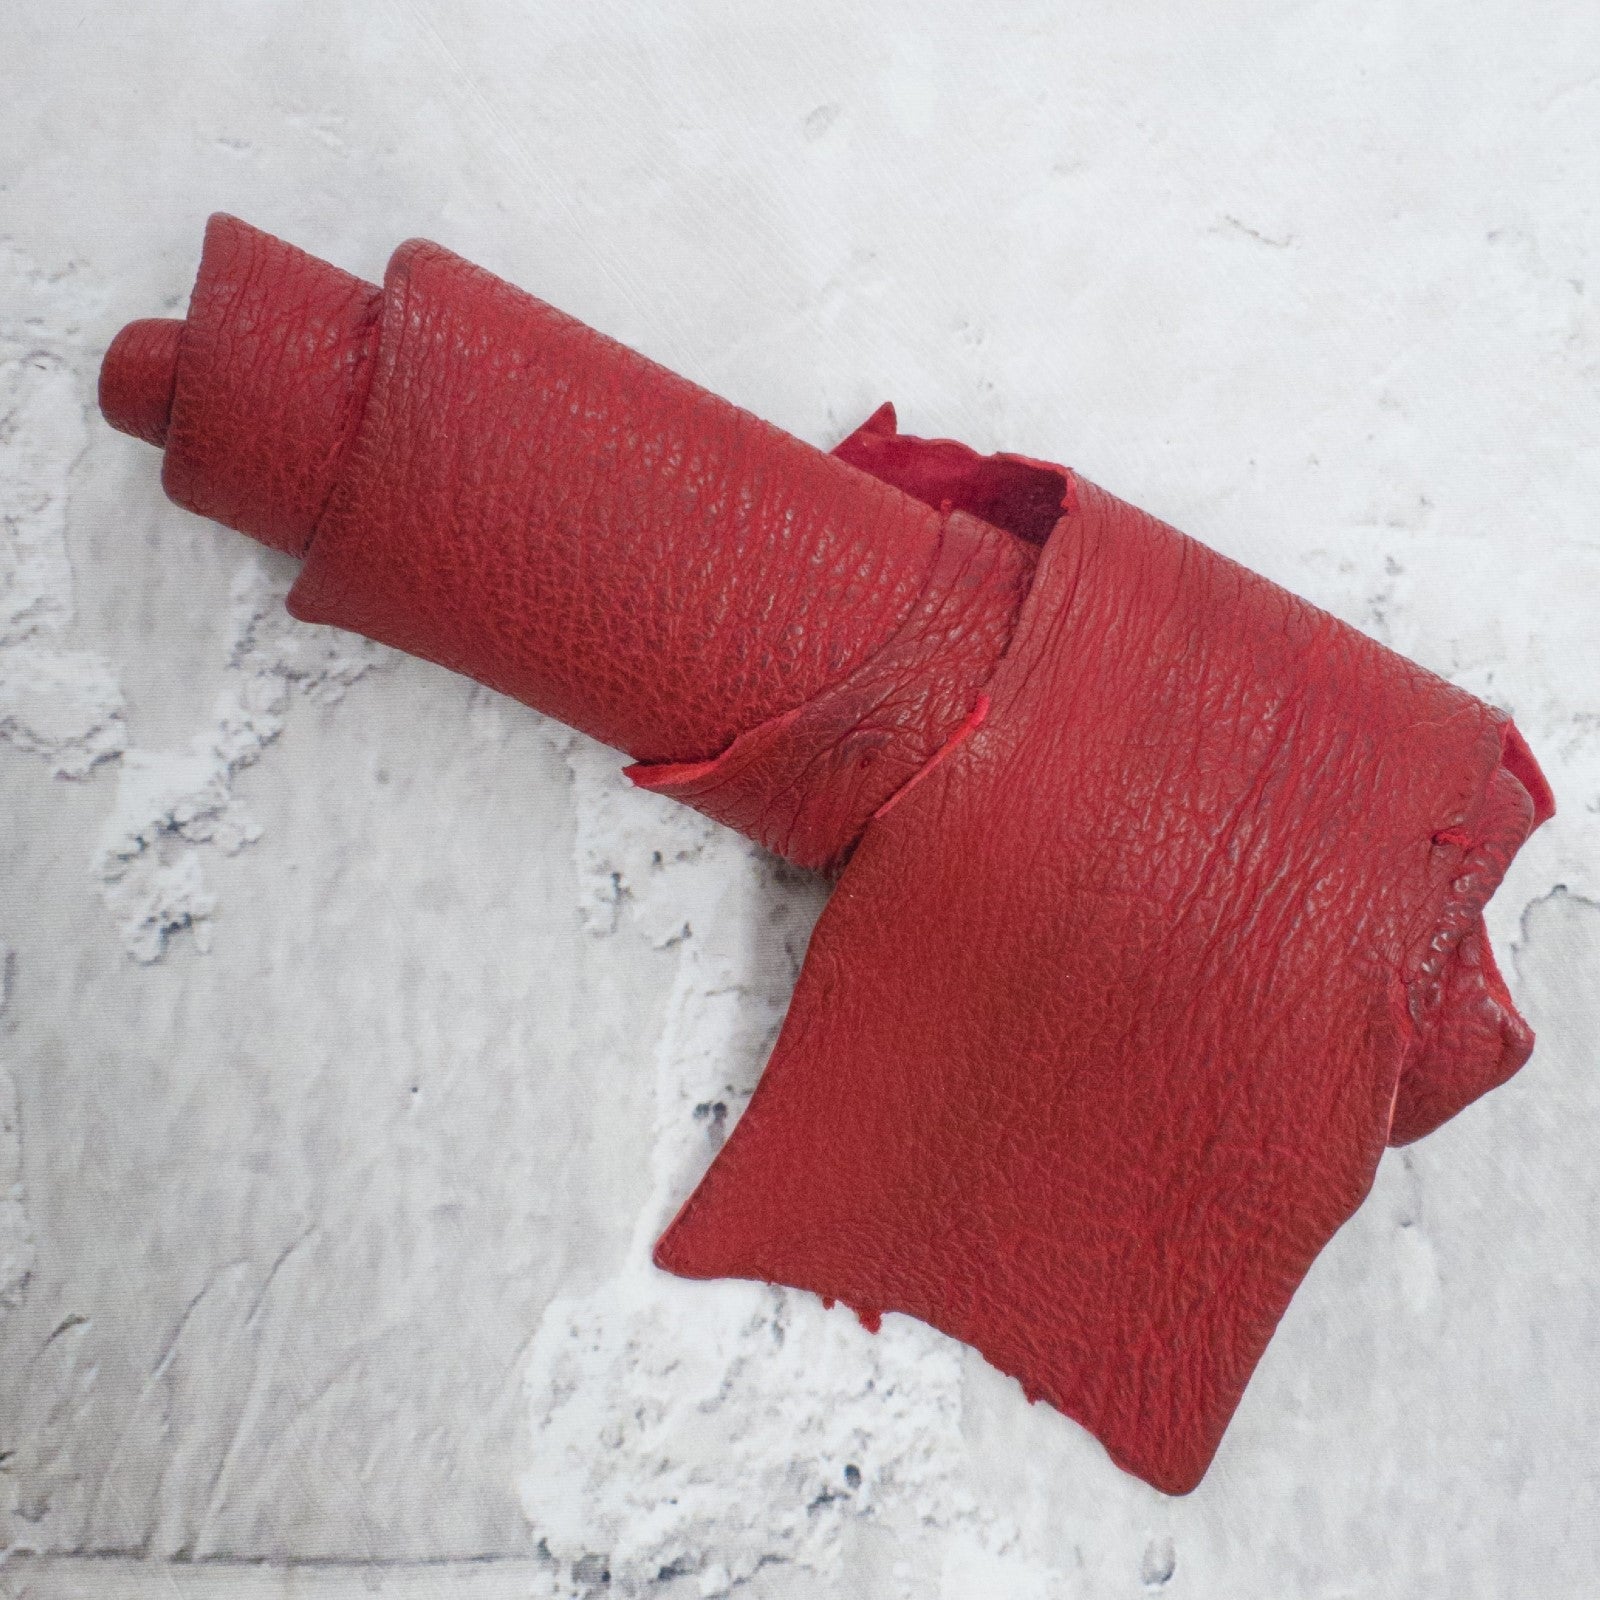 Crimson Red, 3-4 oz, Genuine Japanese Shark Pieces,  | The Leather Guy